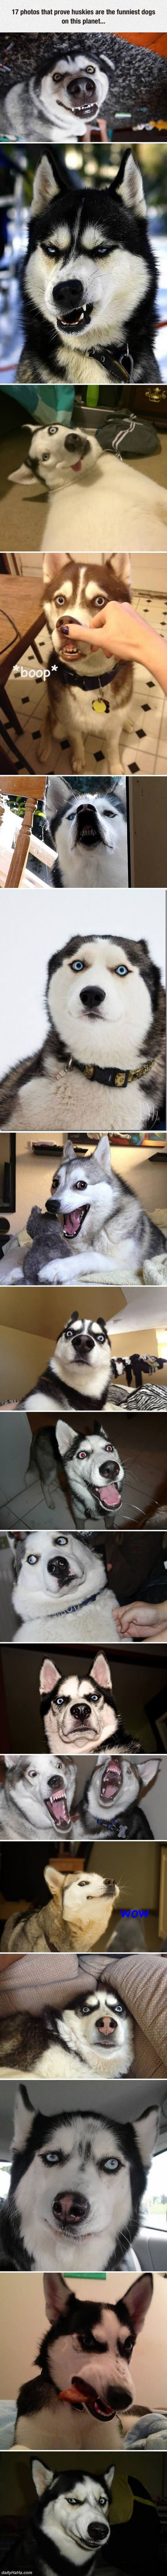 huskies are funny dogs funny picture